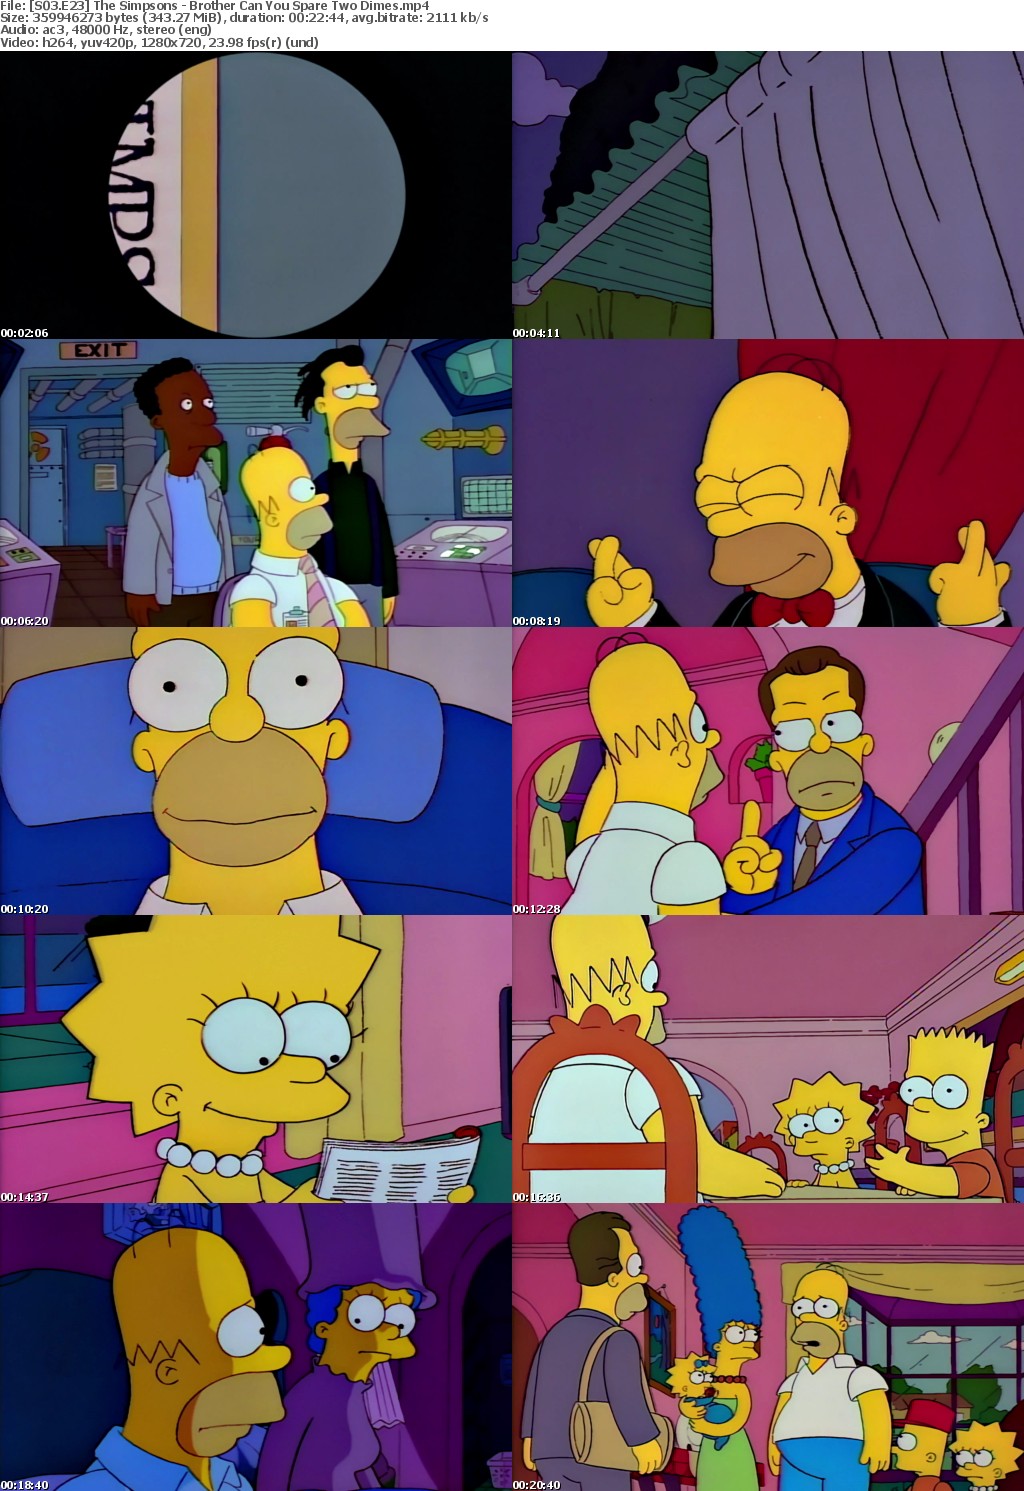 The Simpsons S3 E23 Brother, Can You Spare Two Dimes MP4 720p H264 WEBRip EzzRips